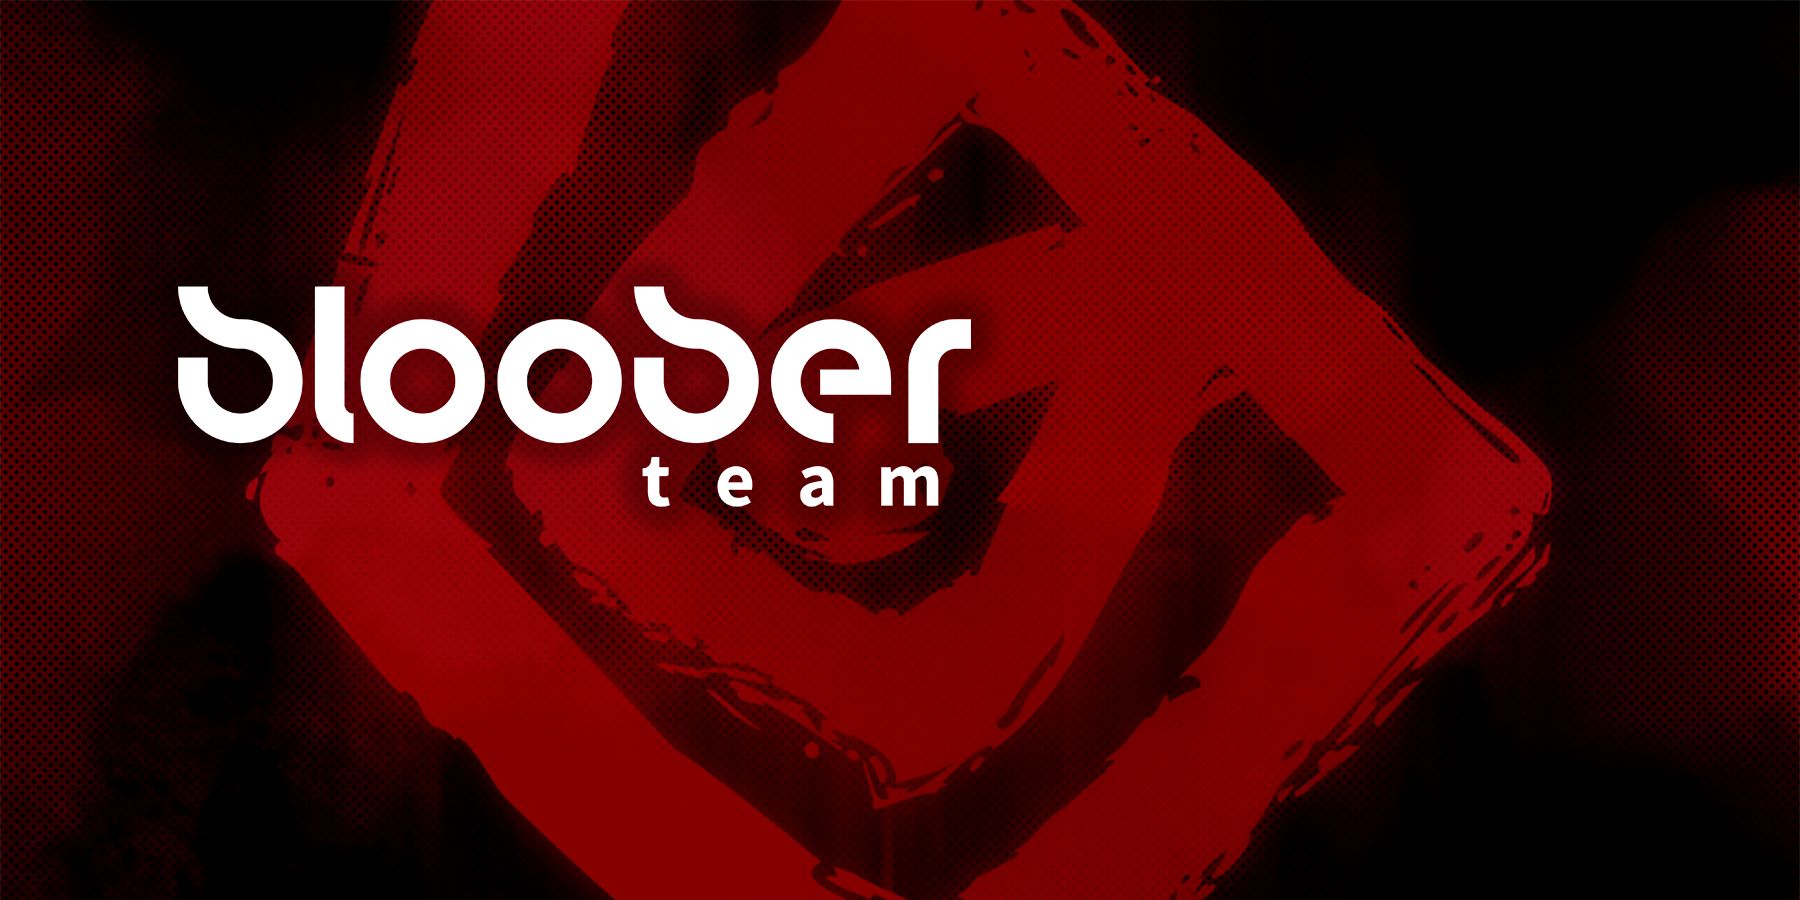 bloober team in white text on giant logo